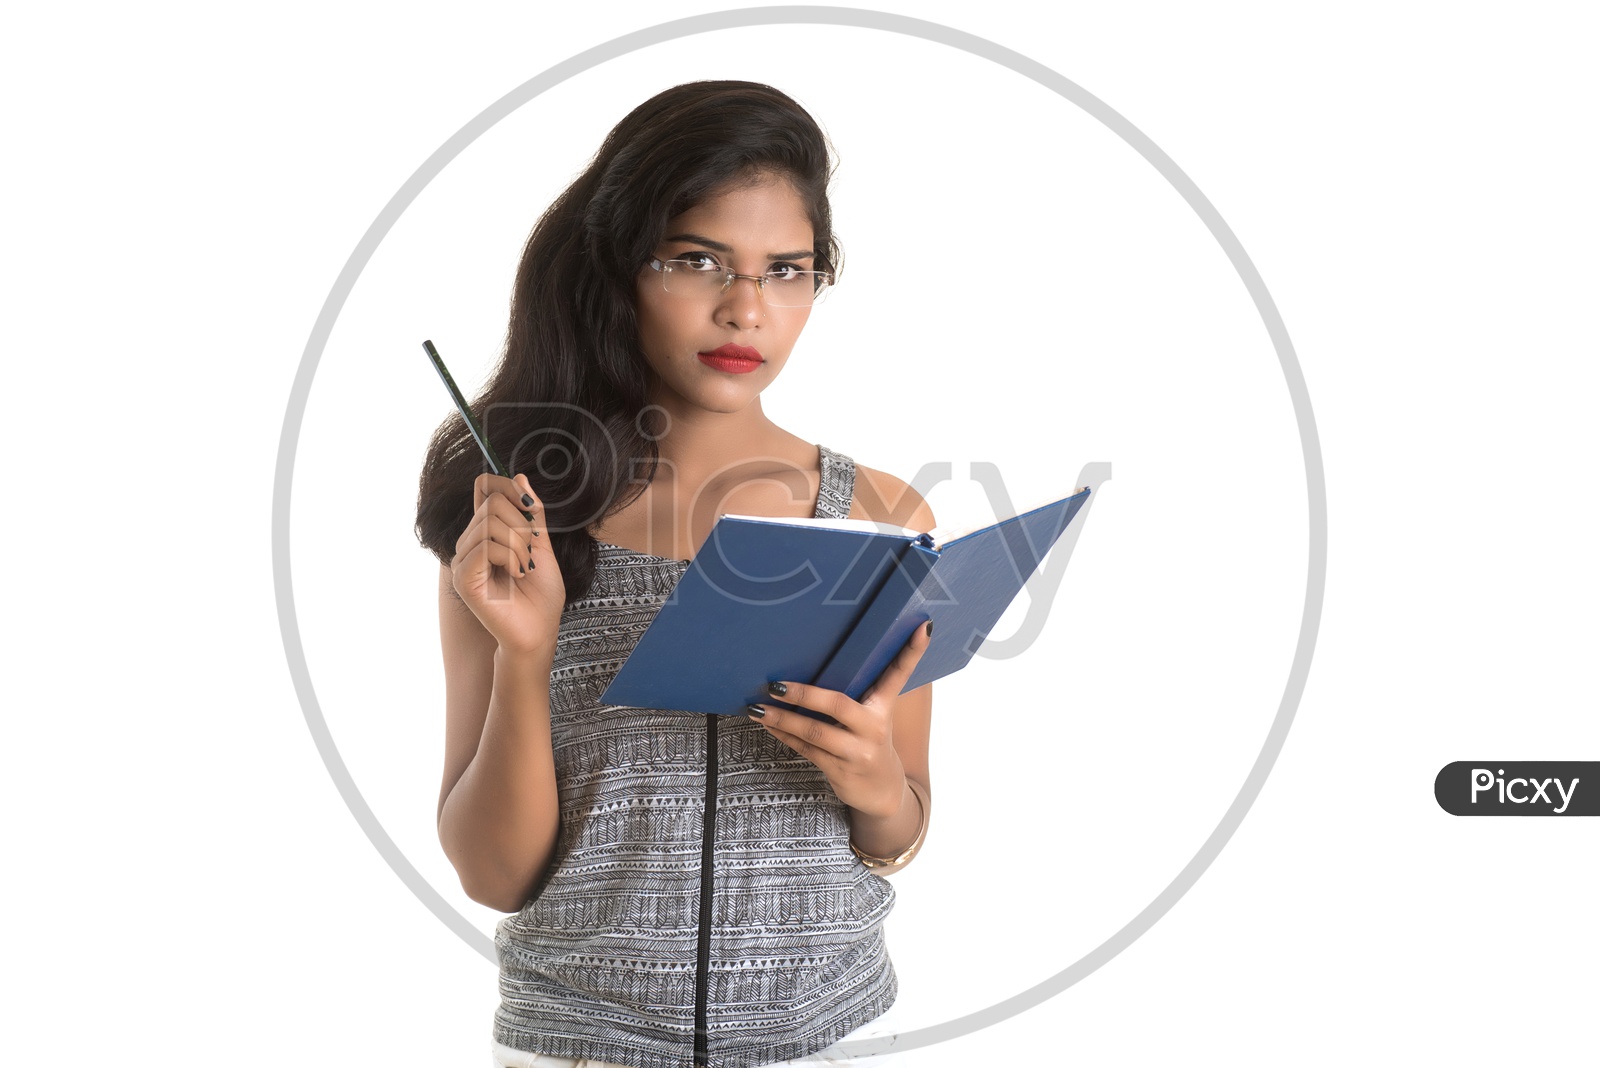 Pretty Young Girl Student Holding Book with pretty expressions and  Posing on an isolated White Background